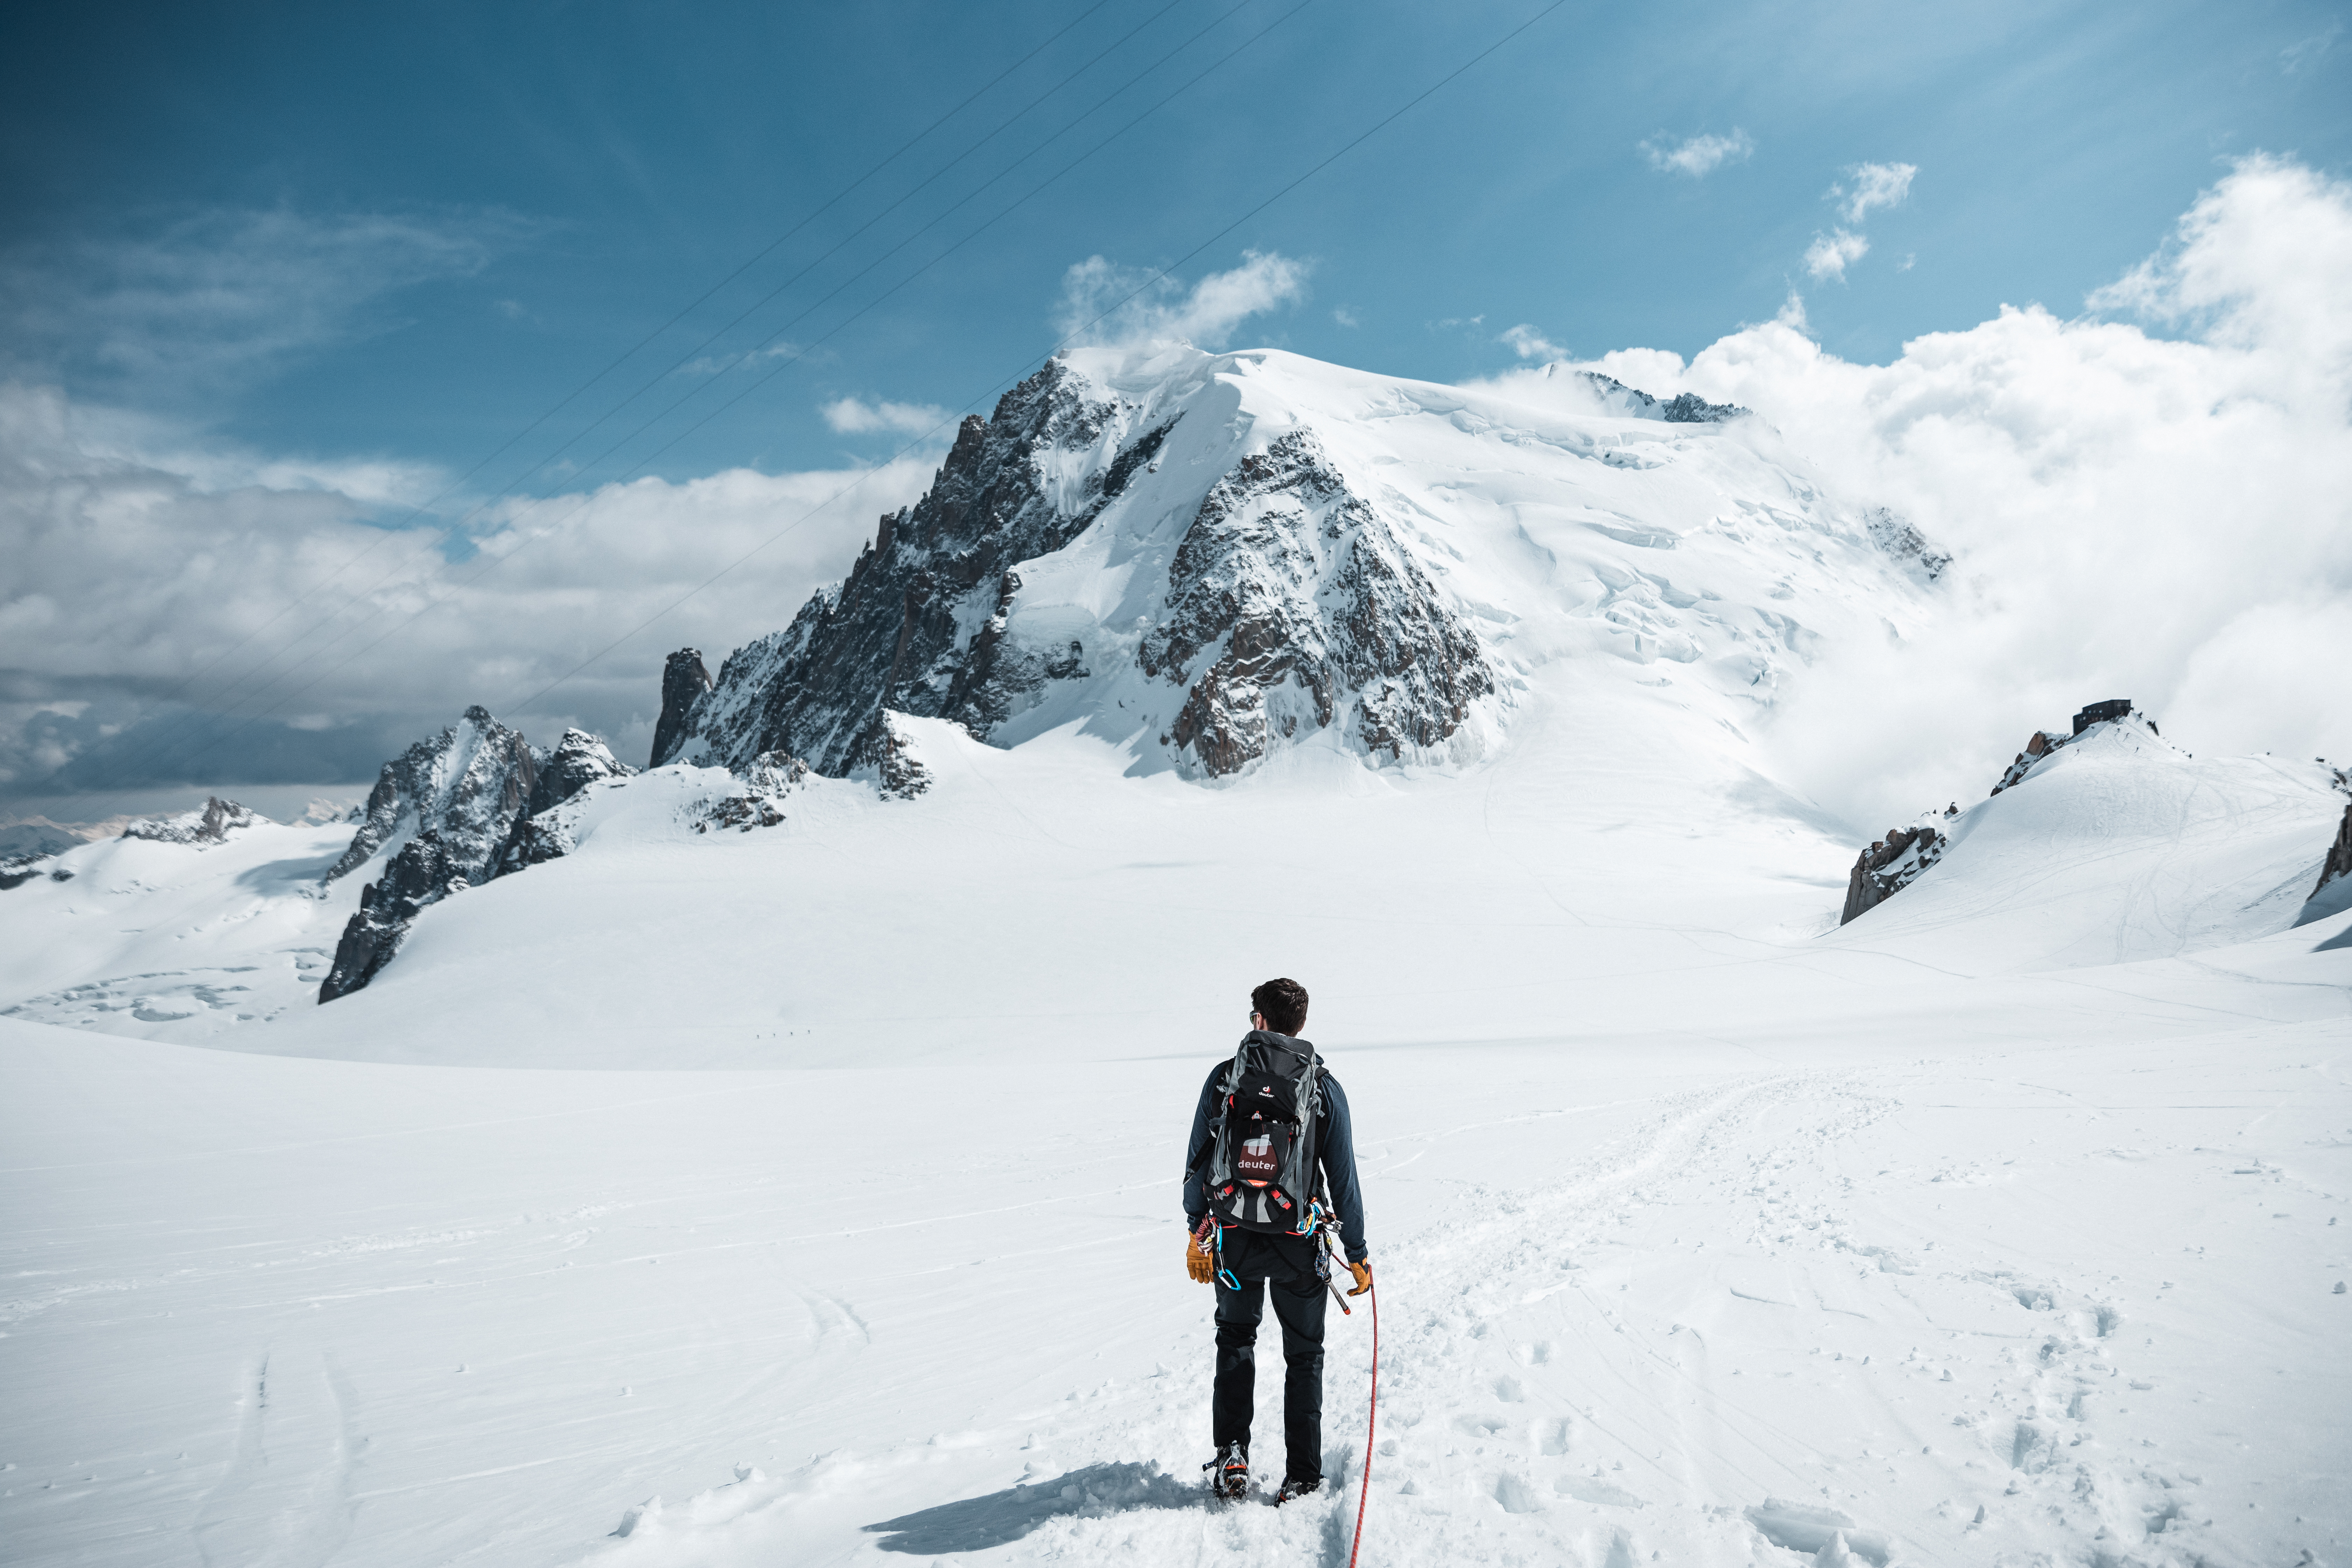 Photograph of mountains for Outlier Ascents, UK based Mont Blanc climbing tour package